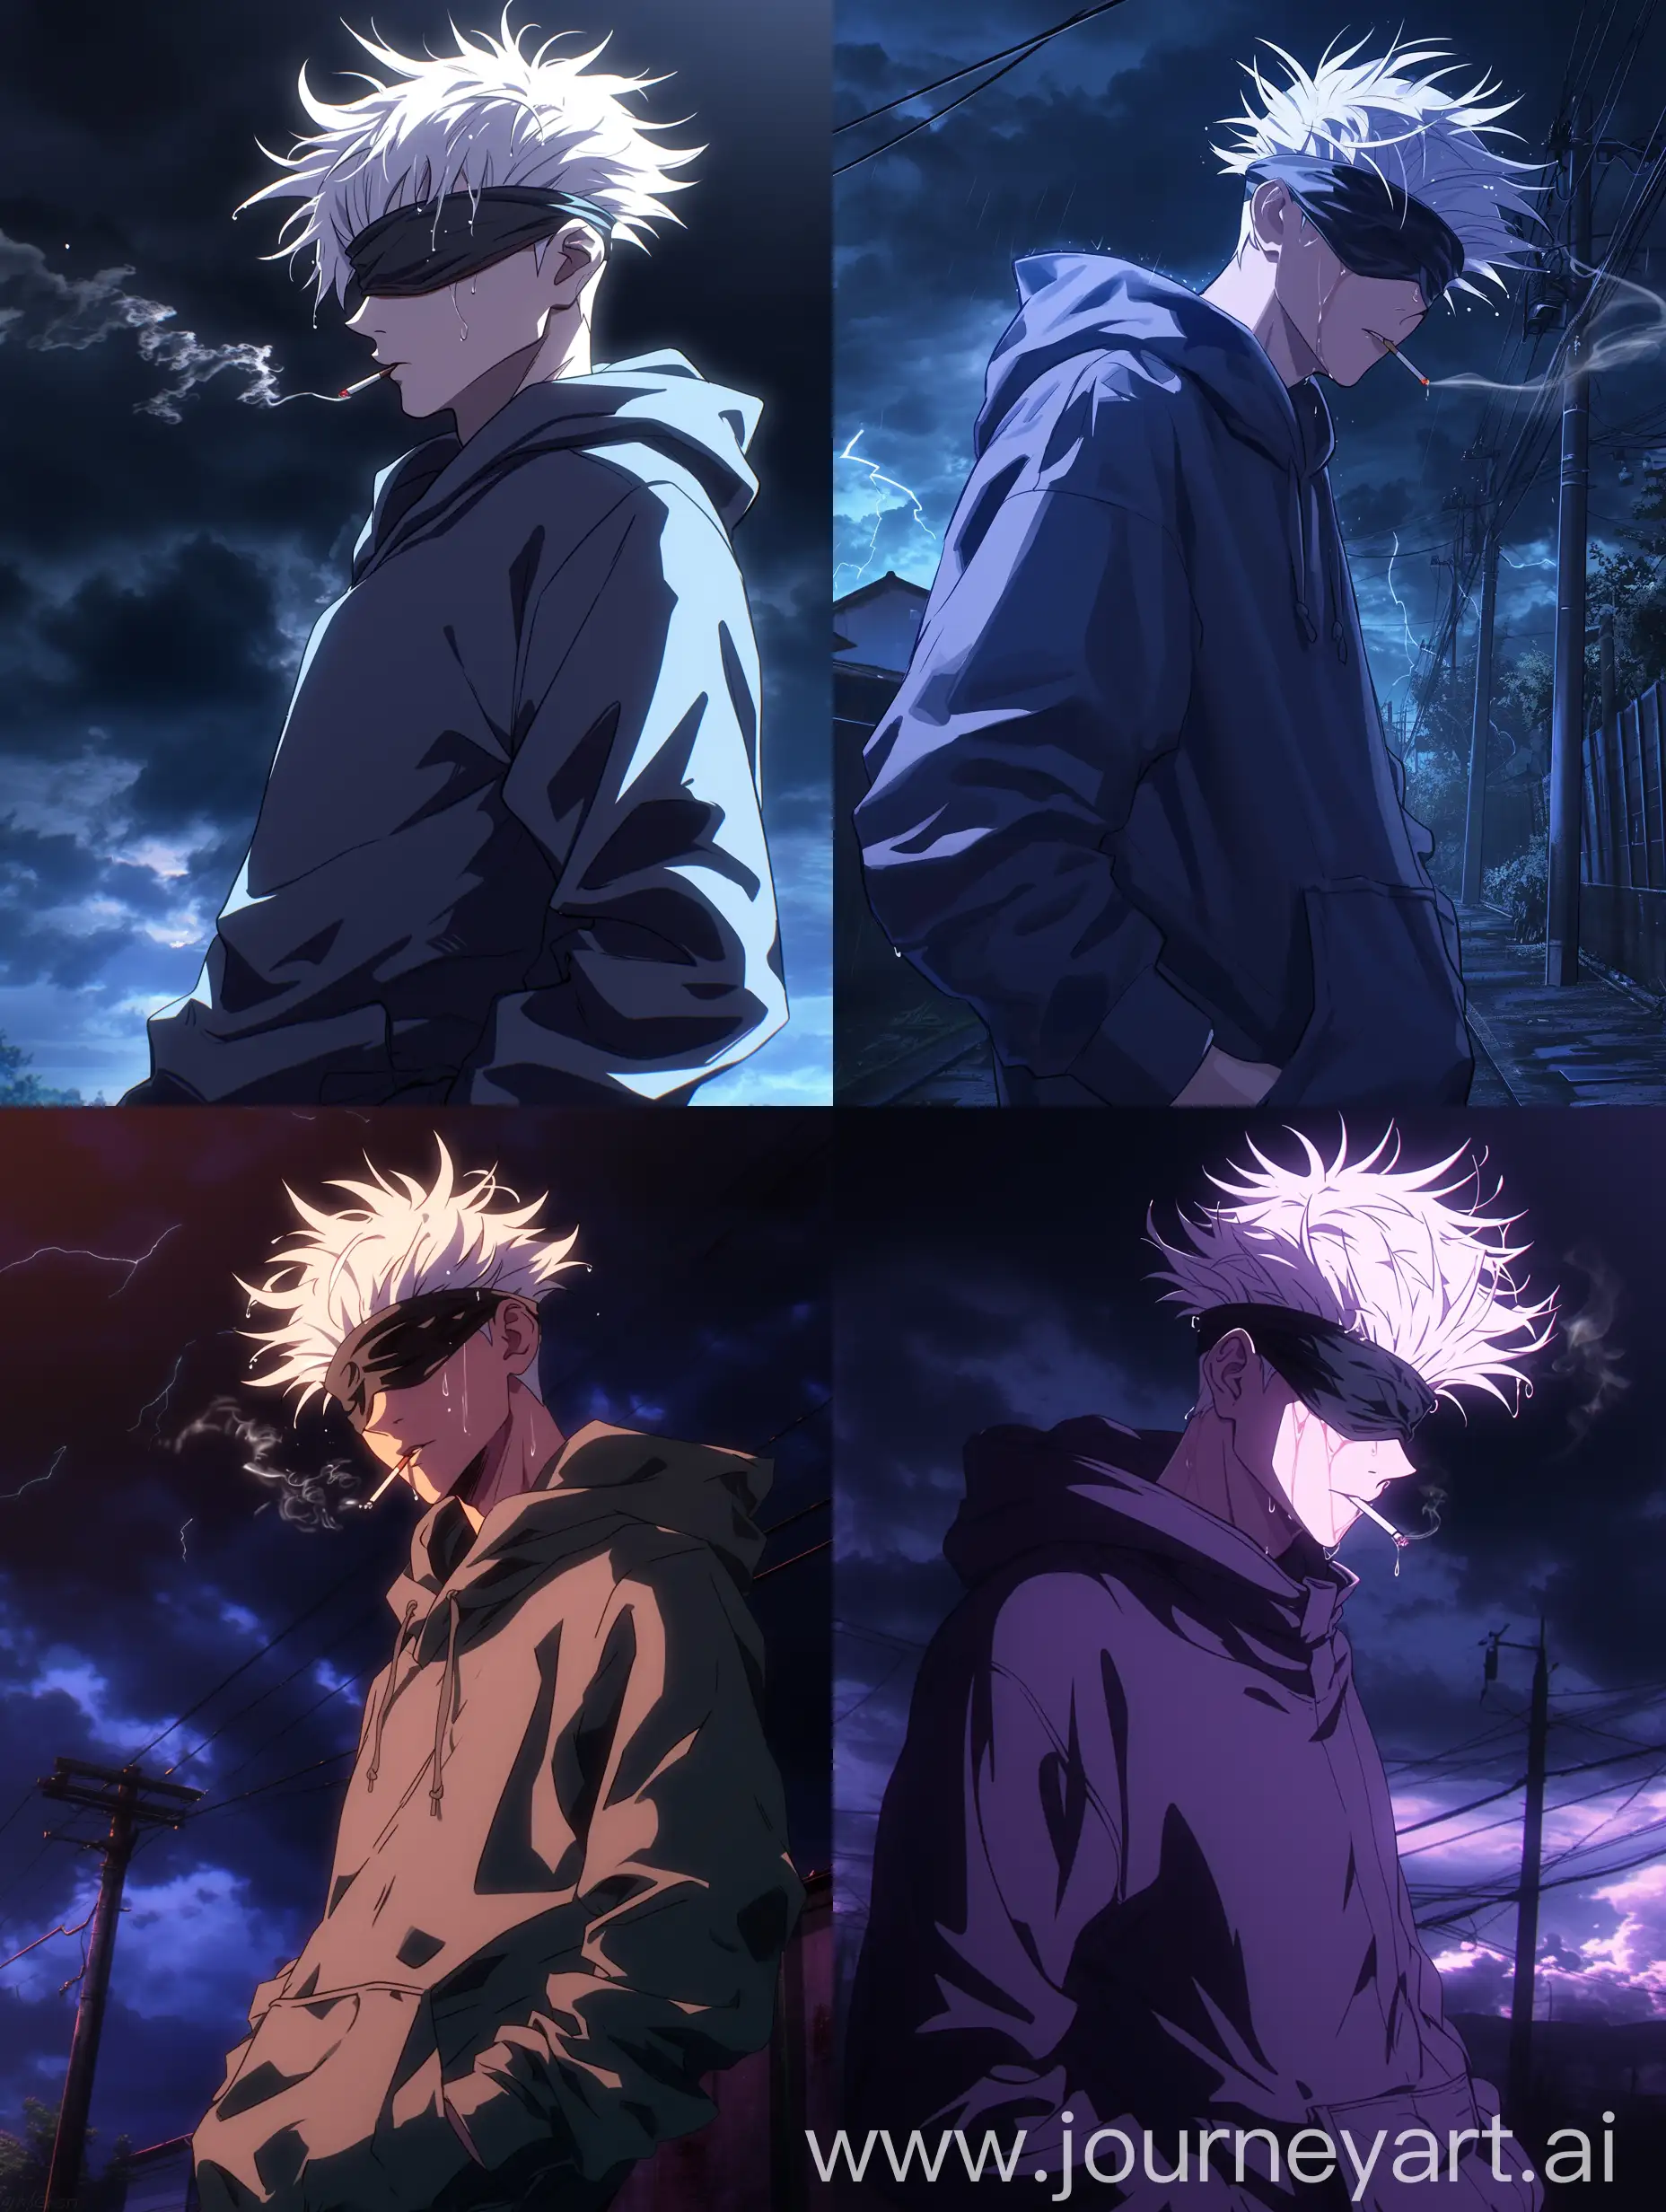 Gojo in cool hoodie, photo screenshot from anime, ((Gojo satoru)), White hair, blind fold, gojo from jujutsu kaisen anime, depressed, sad and confident, smoking cigarette, wet hairs ,,hairs covering some part of blind fold,, looking at the viewer from side, cool look, wearing hoodie, jujutsu kaisen animation style, background art of ufortable, hands in pocket, half body shot, outdoors , beautiful black thunderstorm sky --niji 6